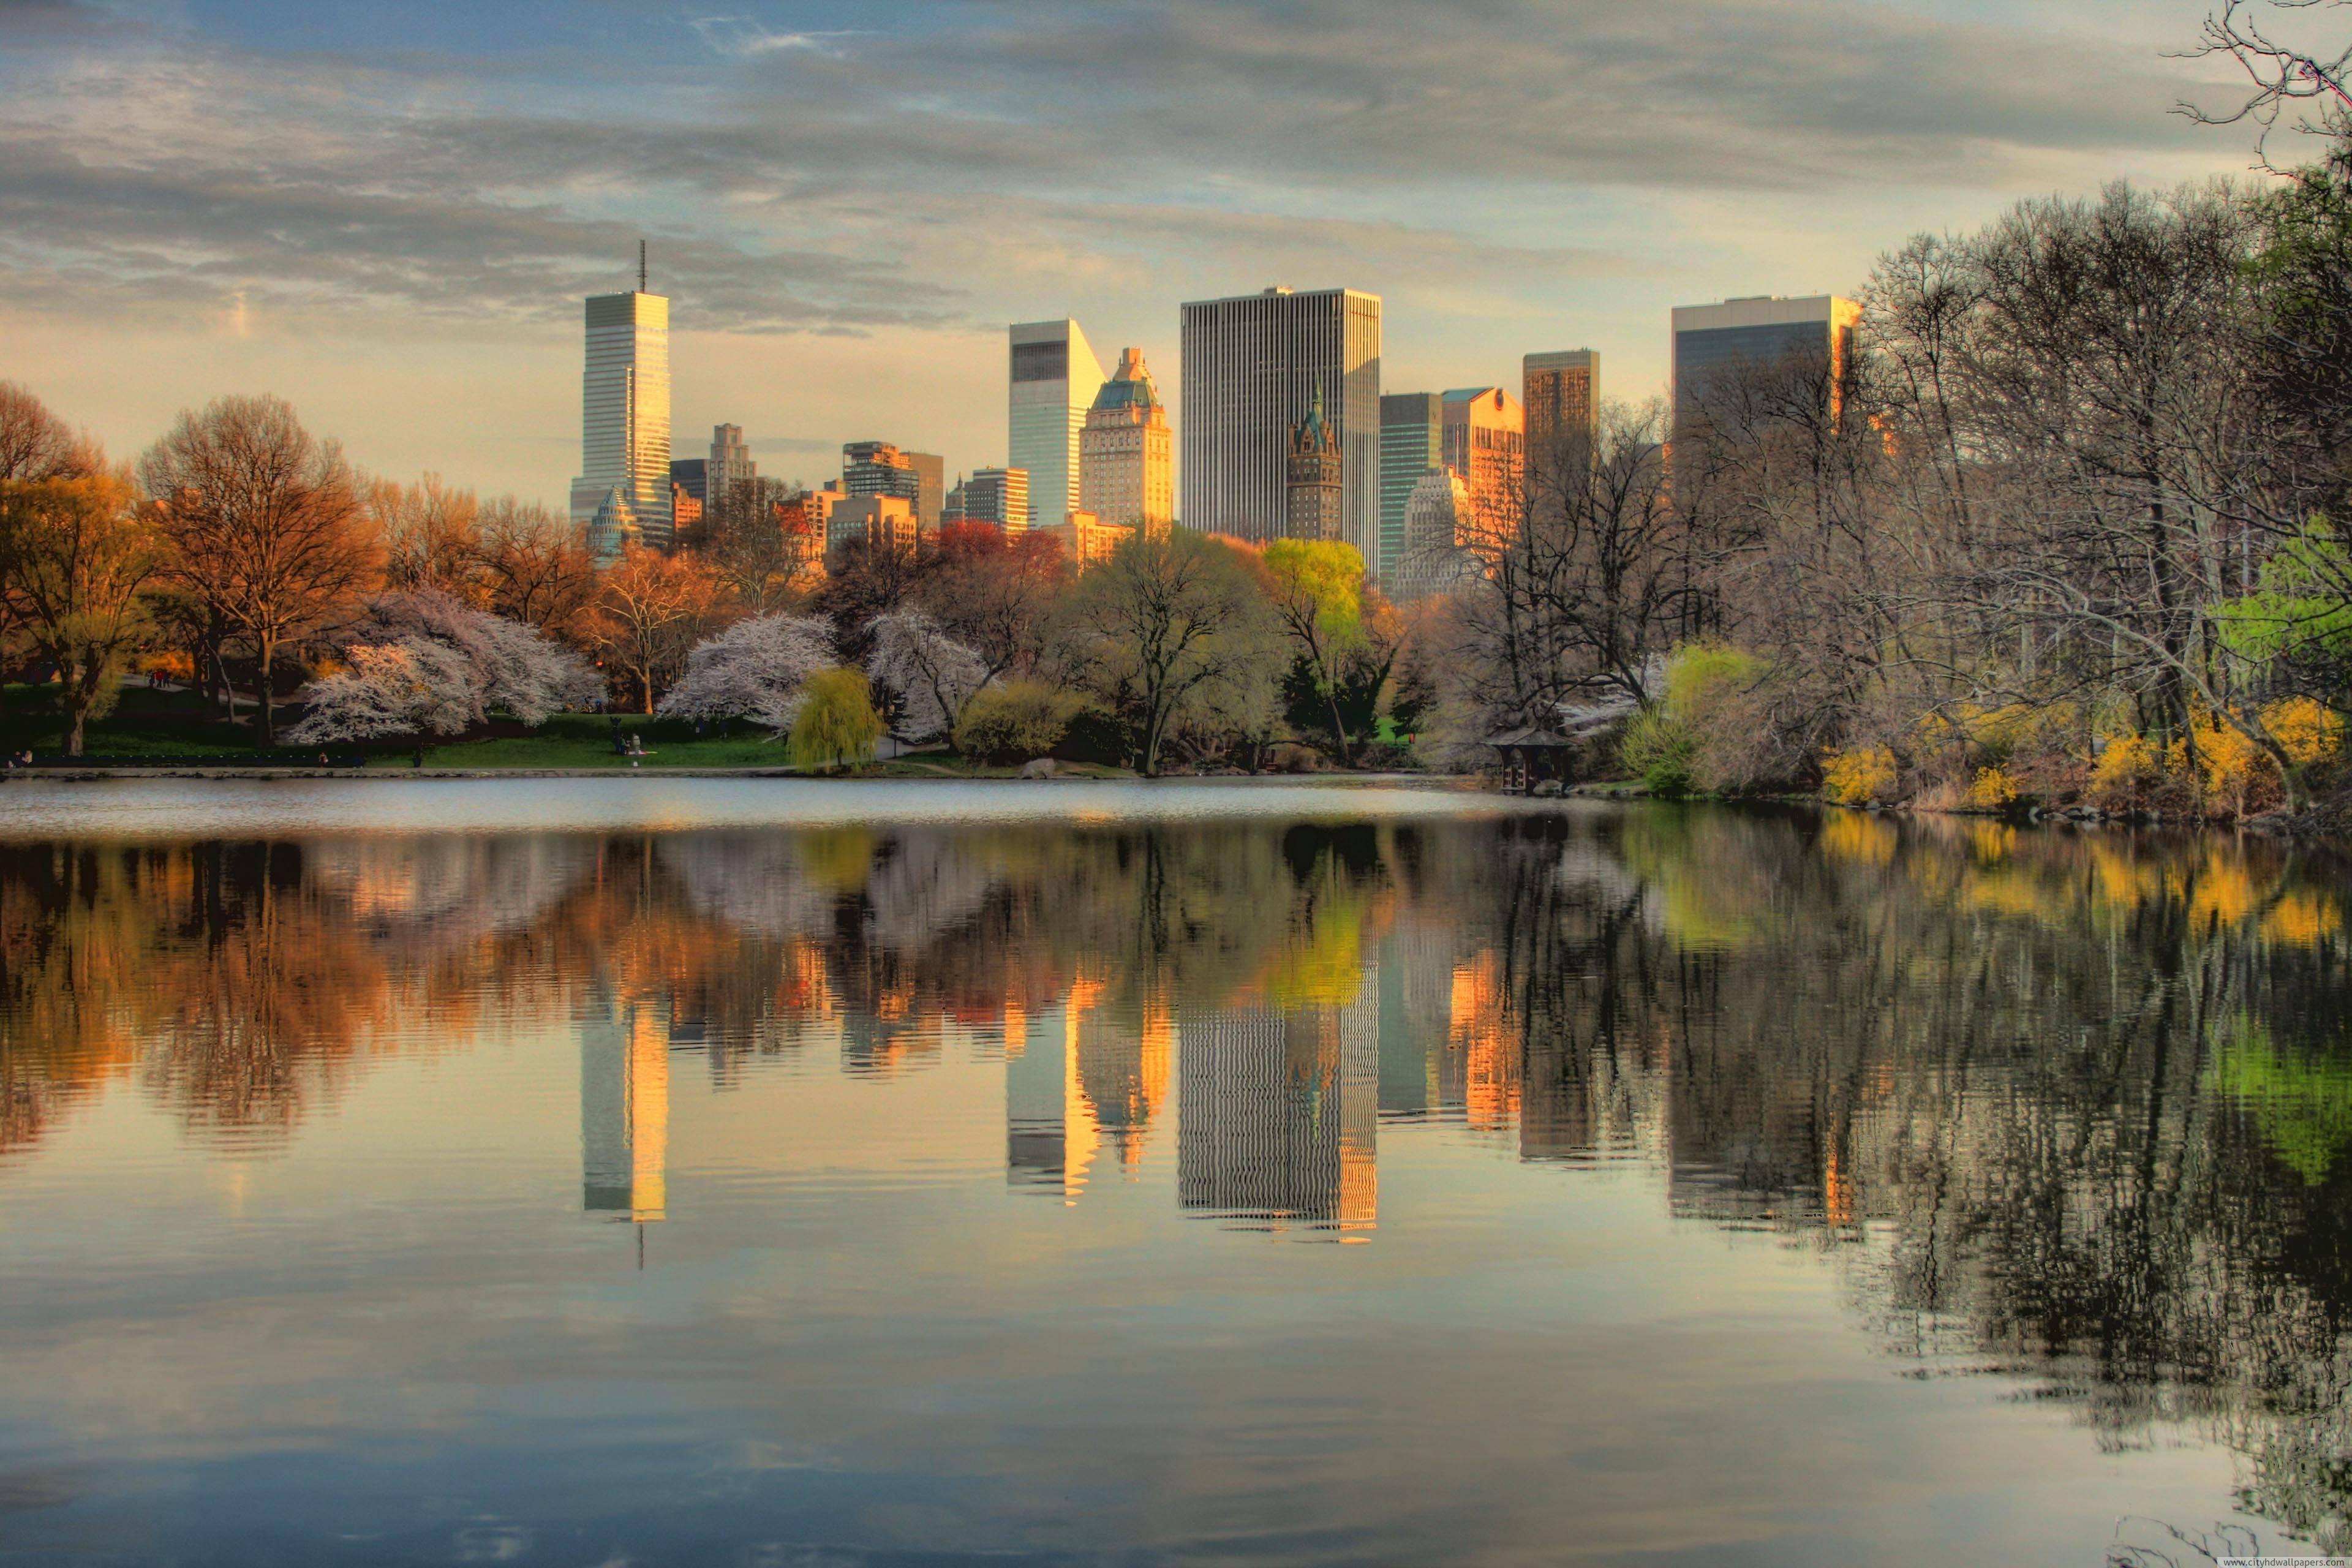 Lake sunset at Central park scenery in New York city